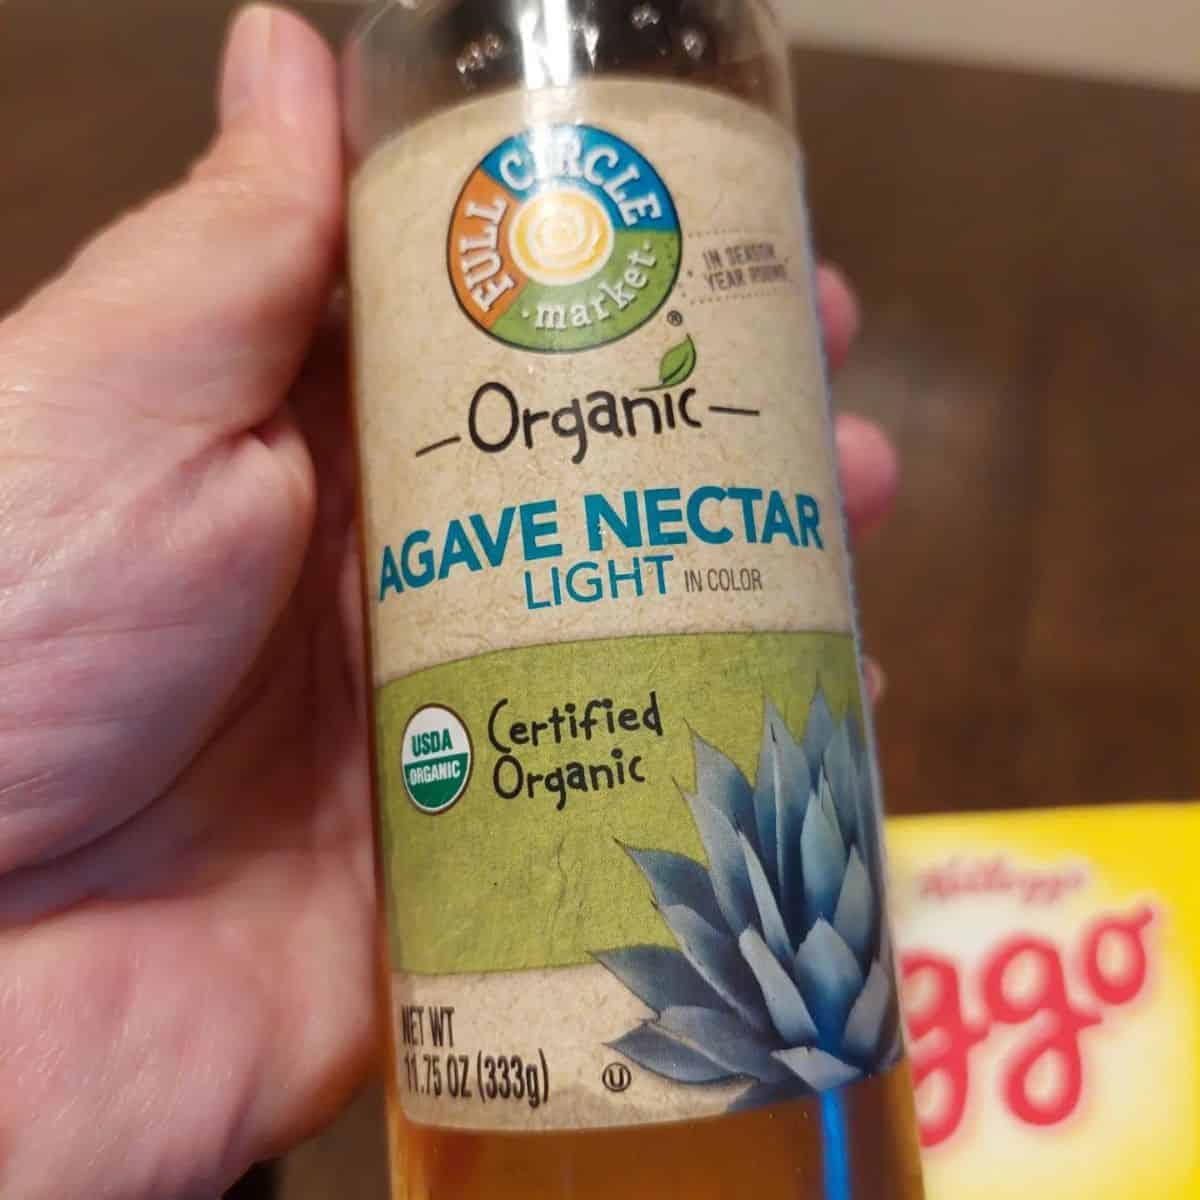 A healthy bottle of Agave nectar used as a natural sweetener.